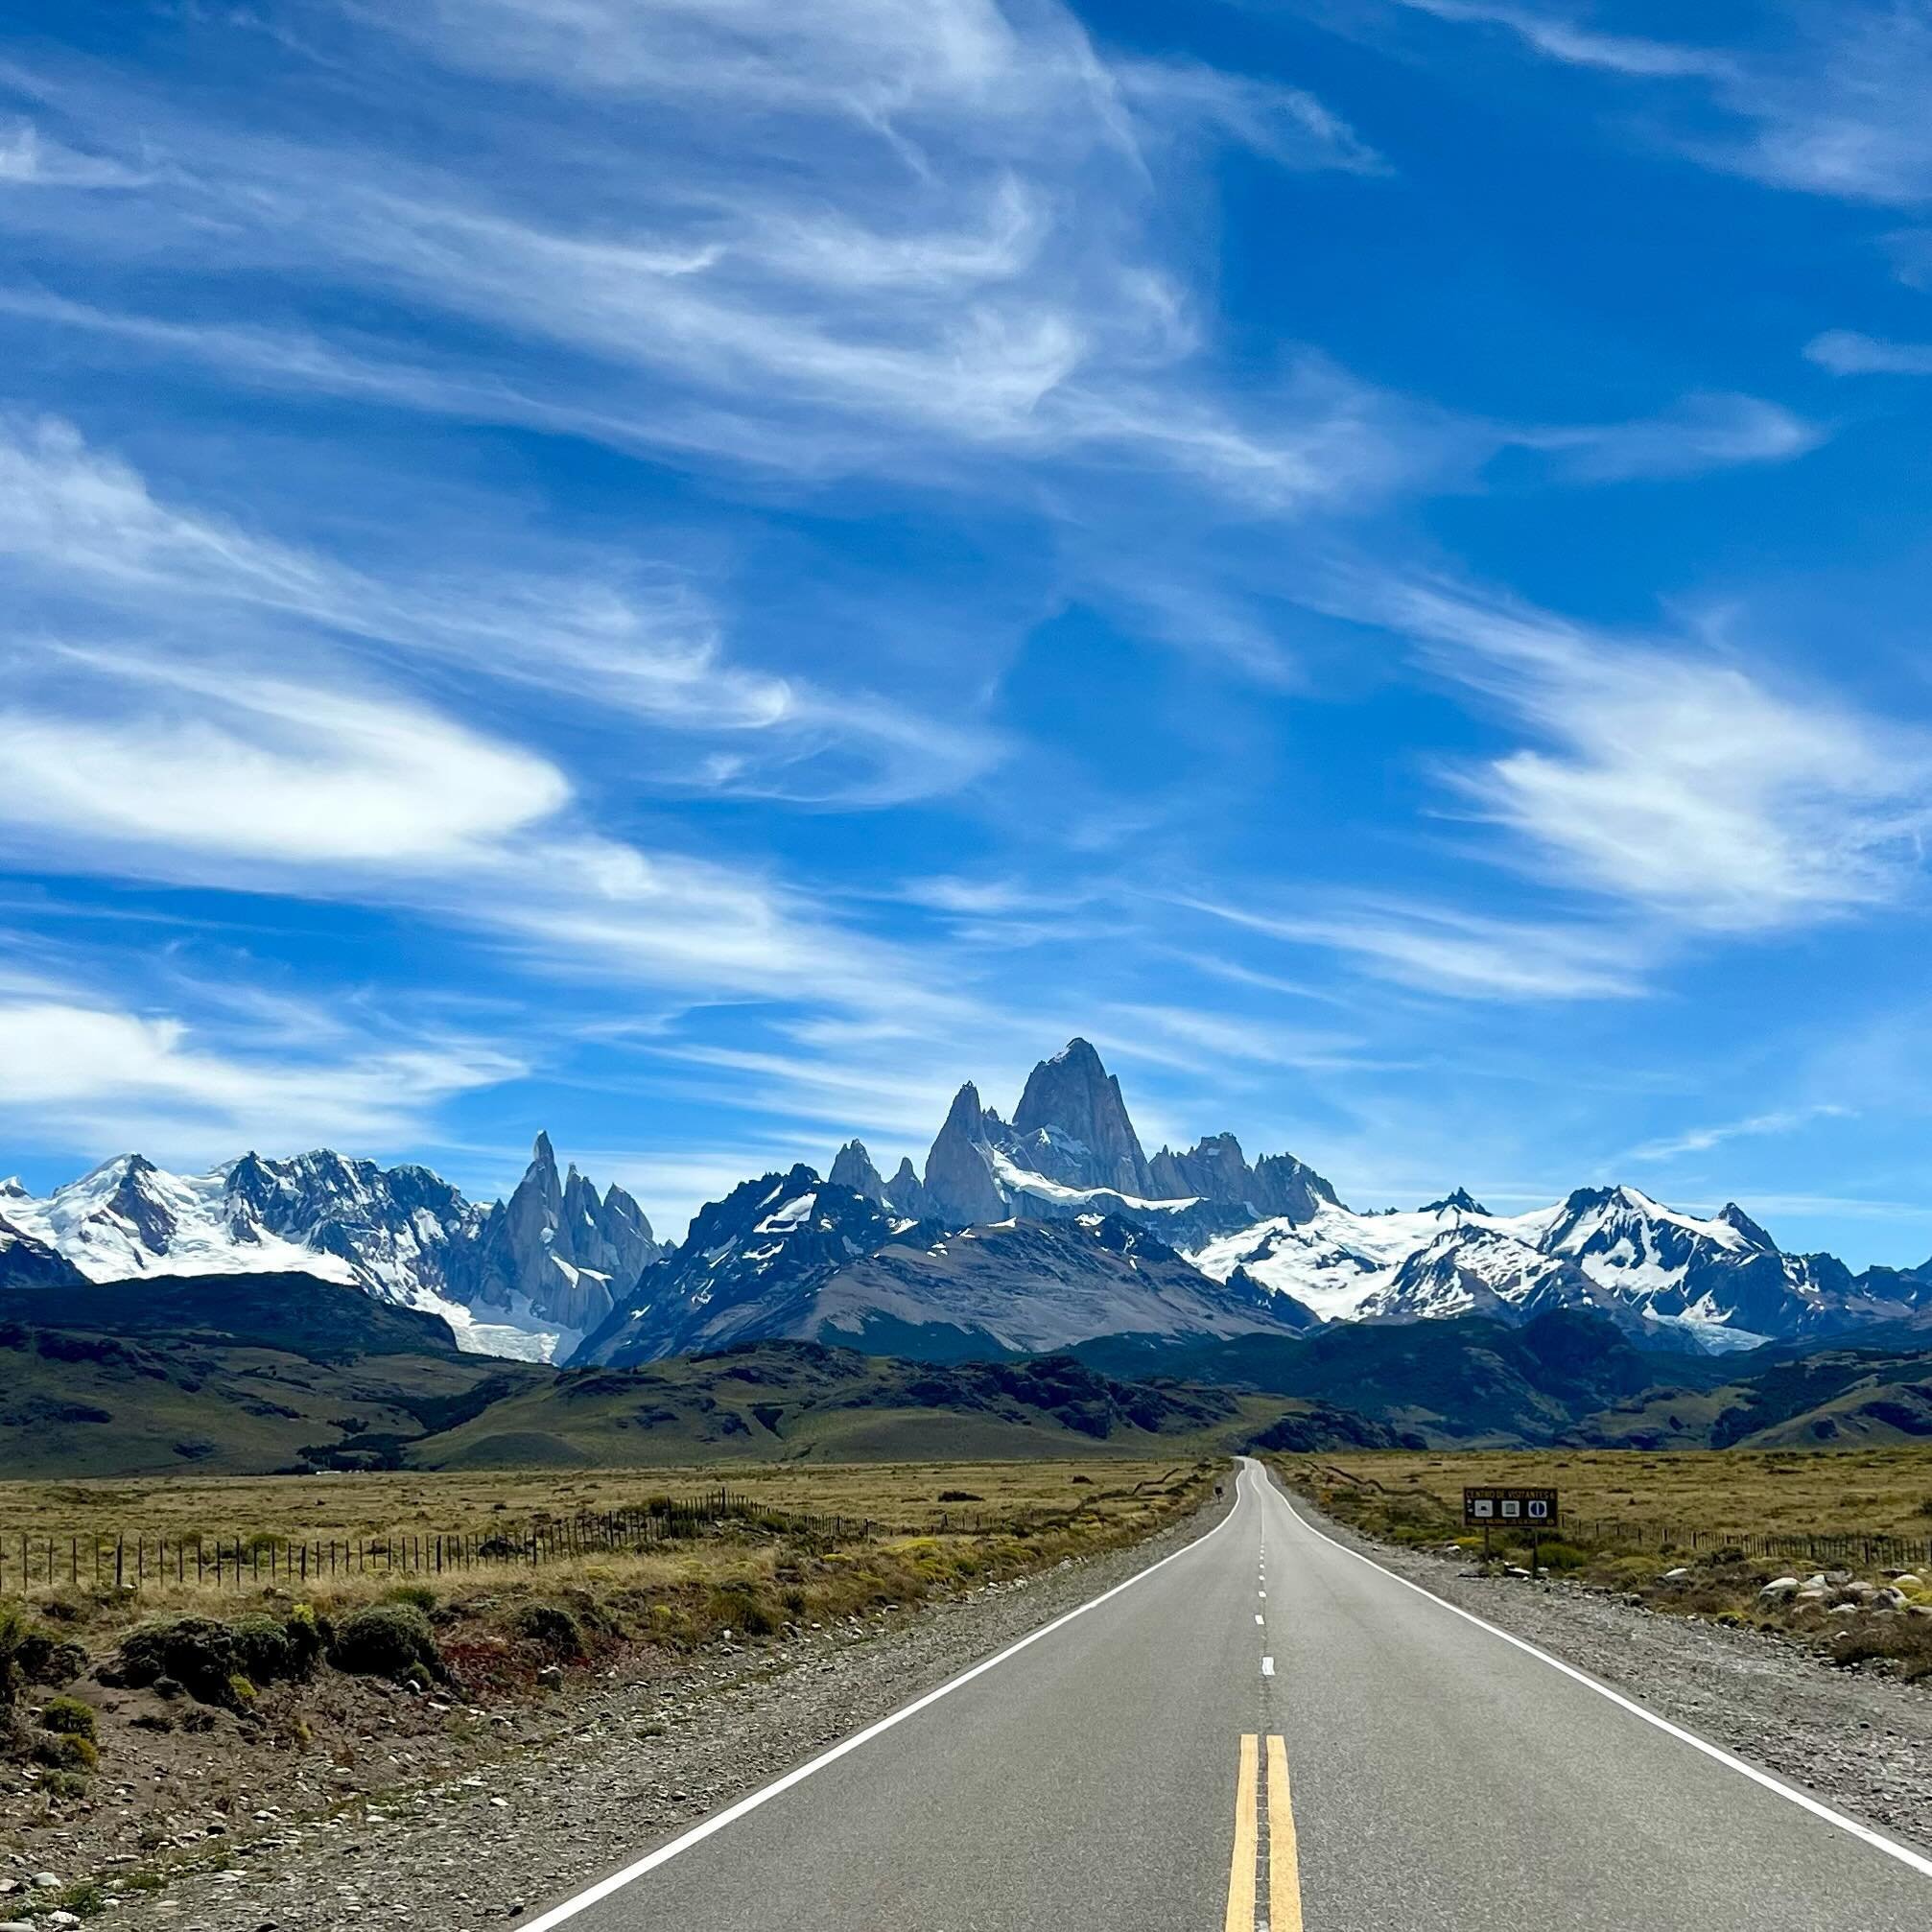 On the road in Southern Patagonia. 

My trip took me from El Chalt&eacute;n to El Calafate in Argentina and over the border in to Chile&rsquo;s Torres del Paine National Park.

Definite bucket list stuff ☑️ 

#elcalafate #elchalt&eacute;n #trekkingpa